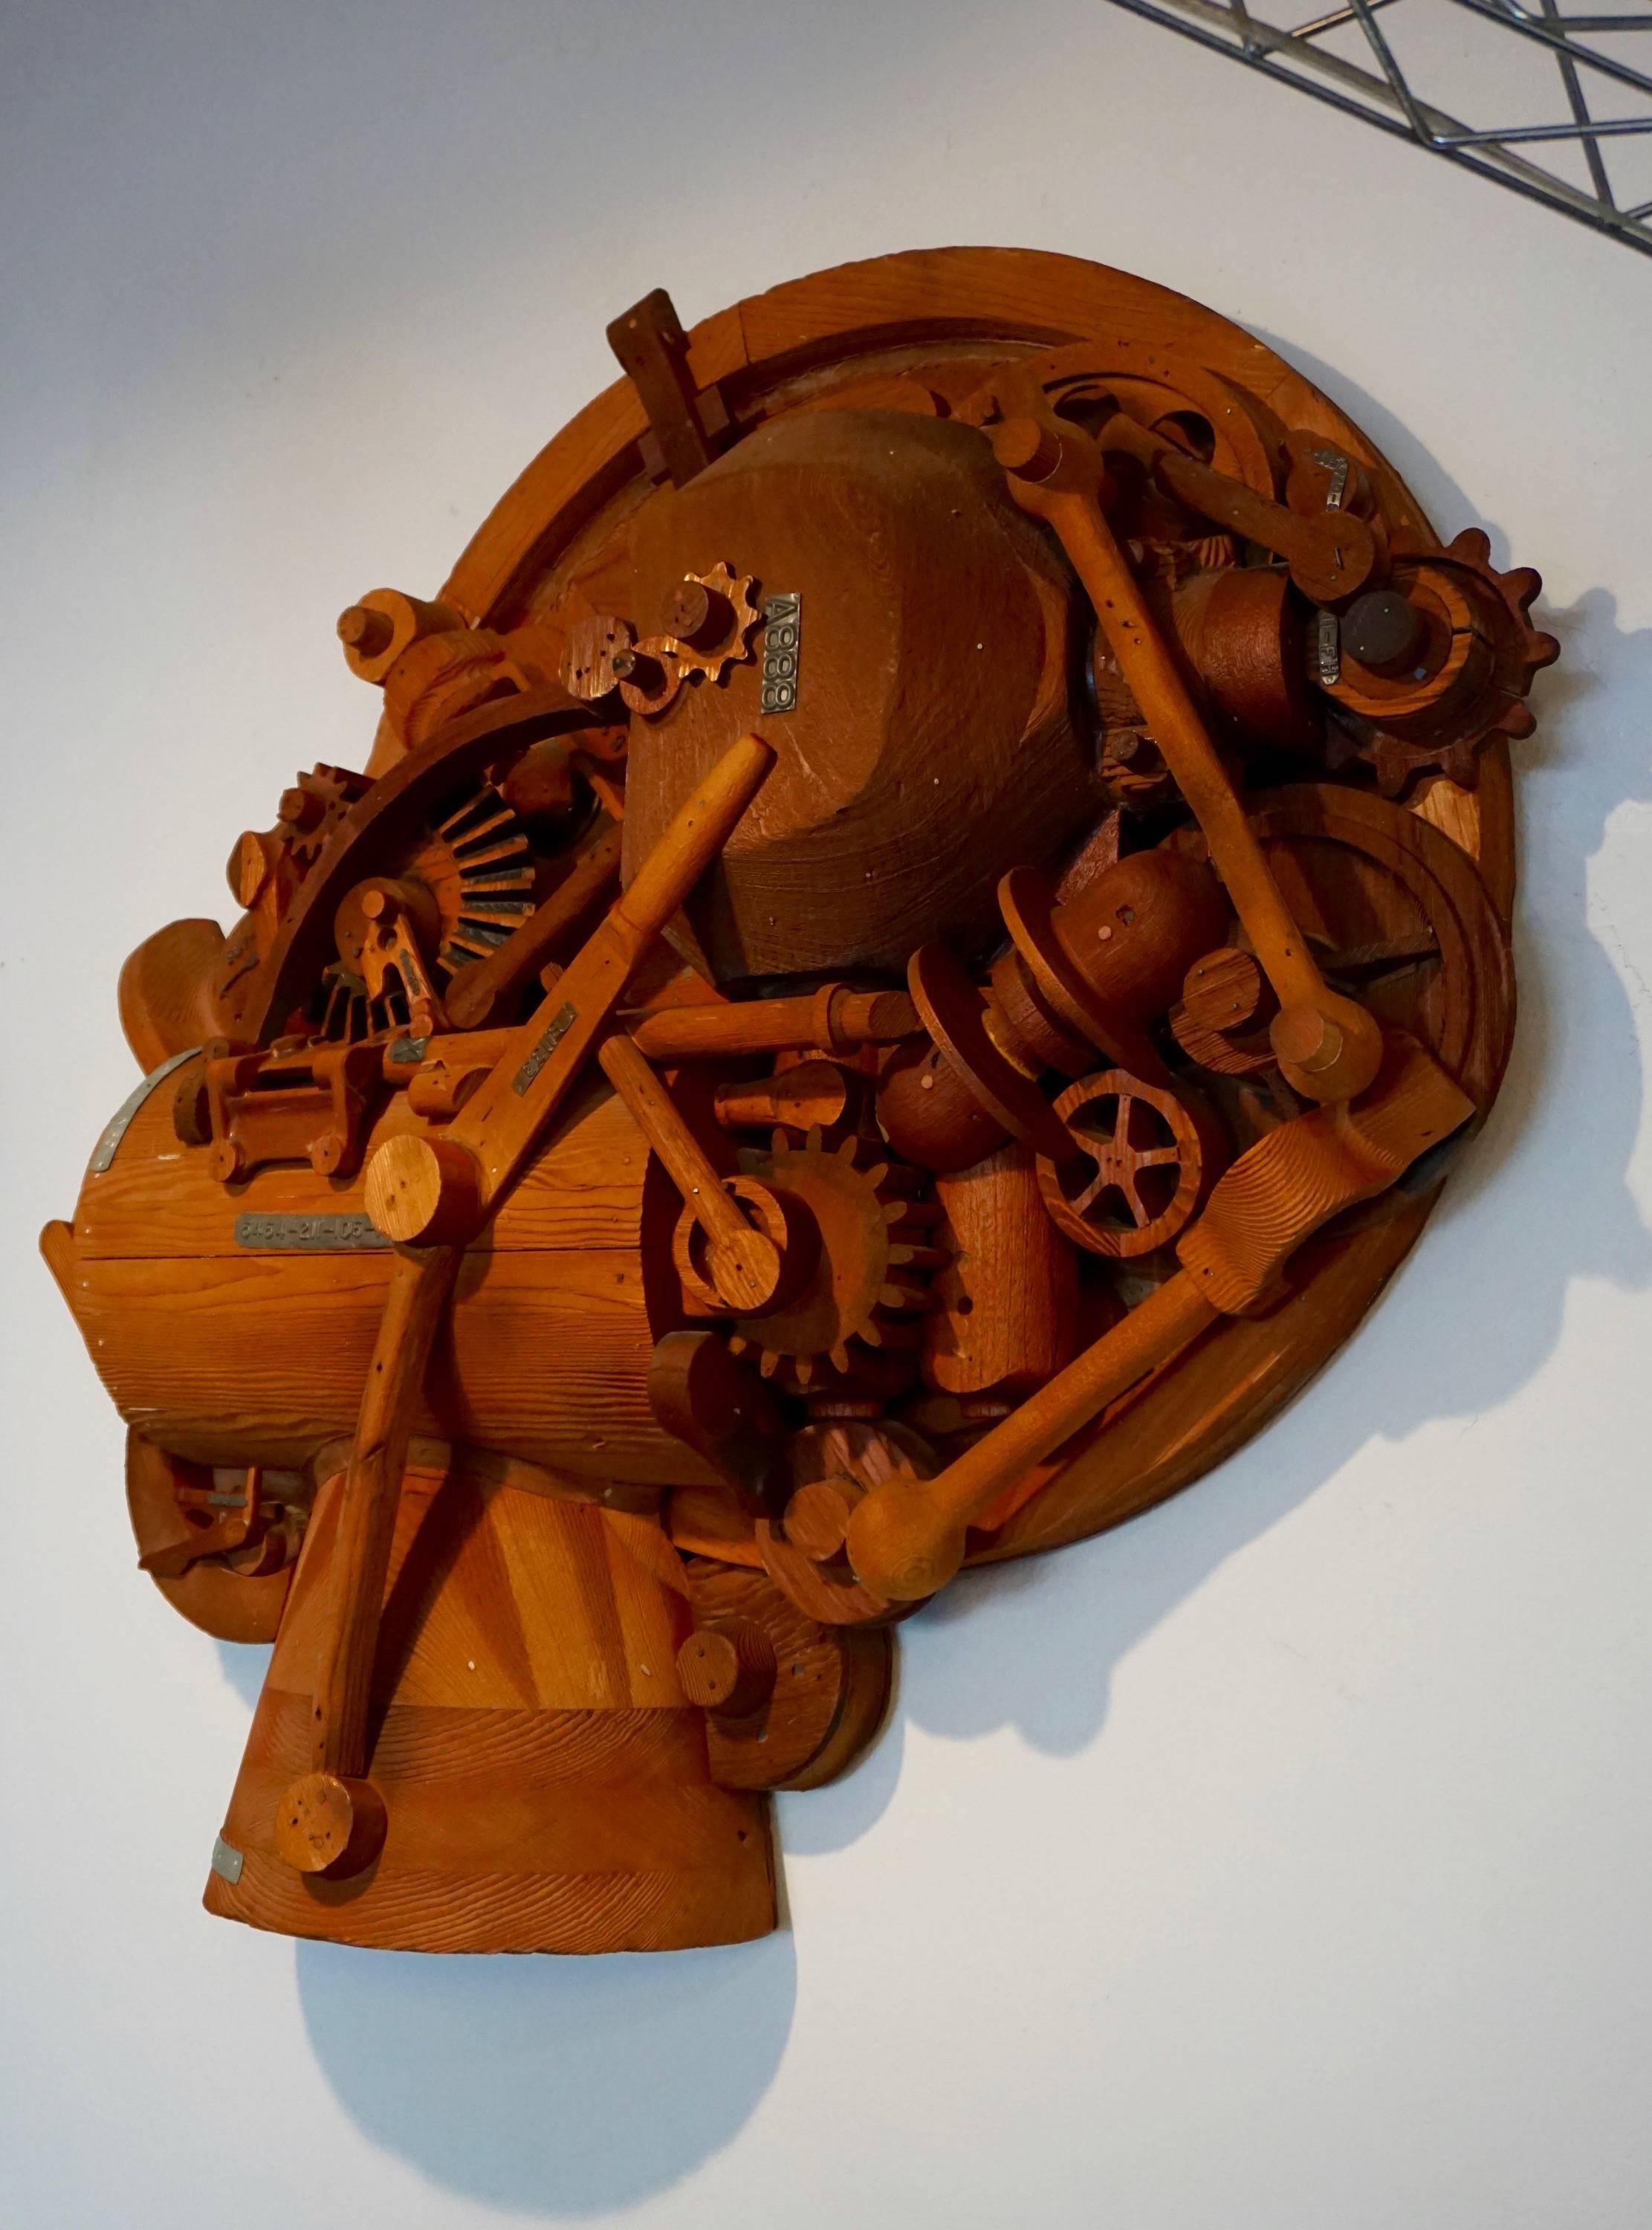 Assemblage of hand-carved redwood tools, gears and pulleys with metal serial numbers. This piece was part of the Bullocks, Los Angeles store display.